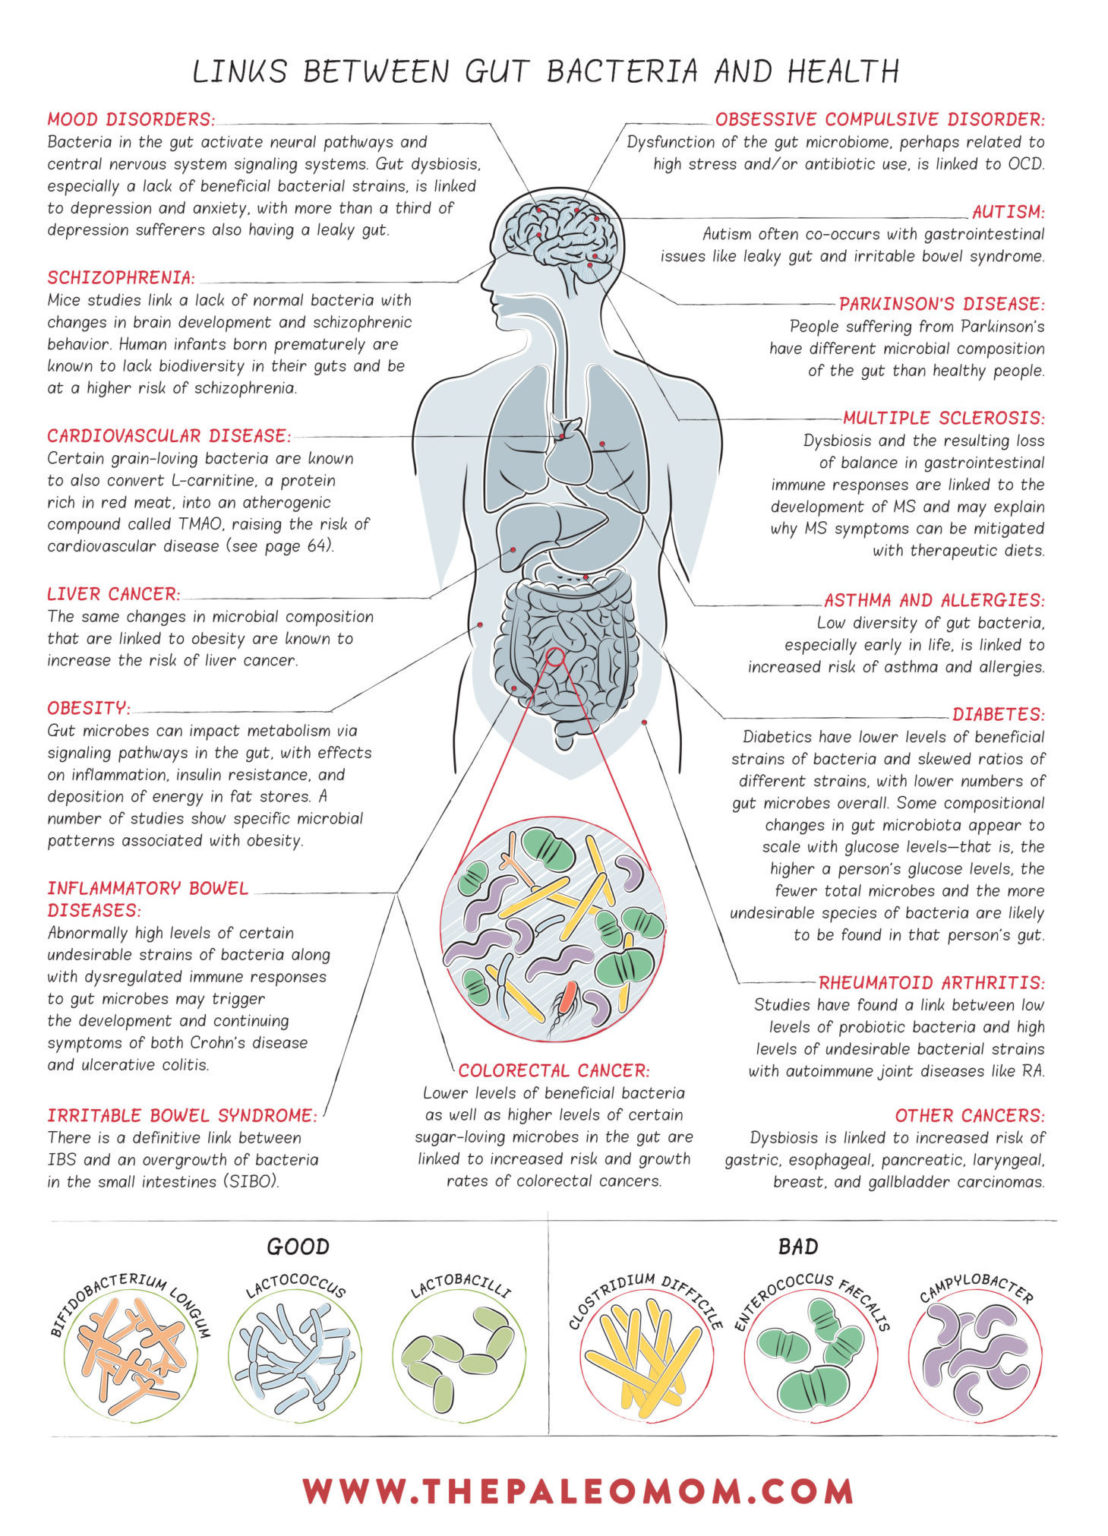 What Is The Gut Microbiome And Why Should We Care About It